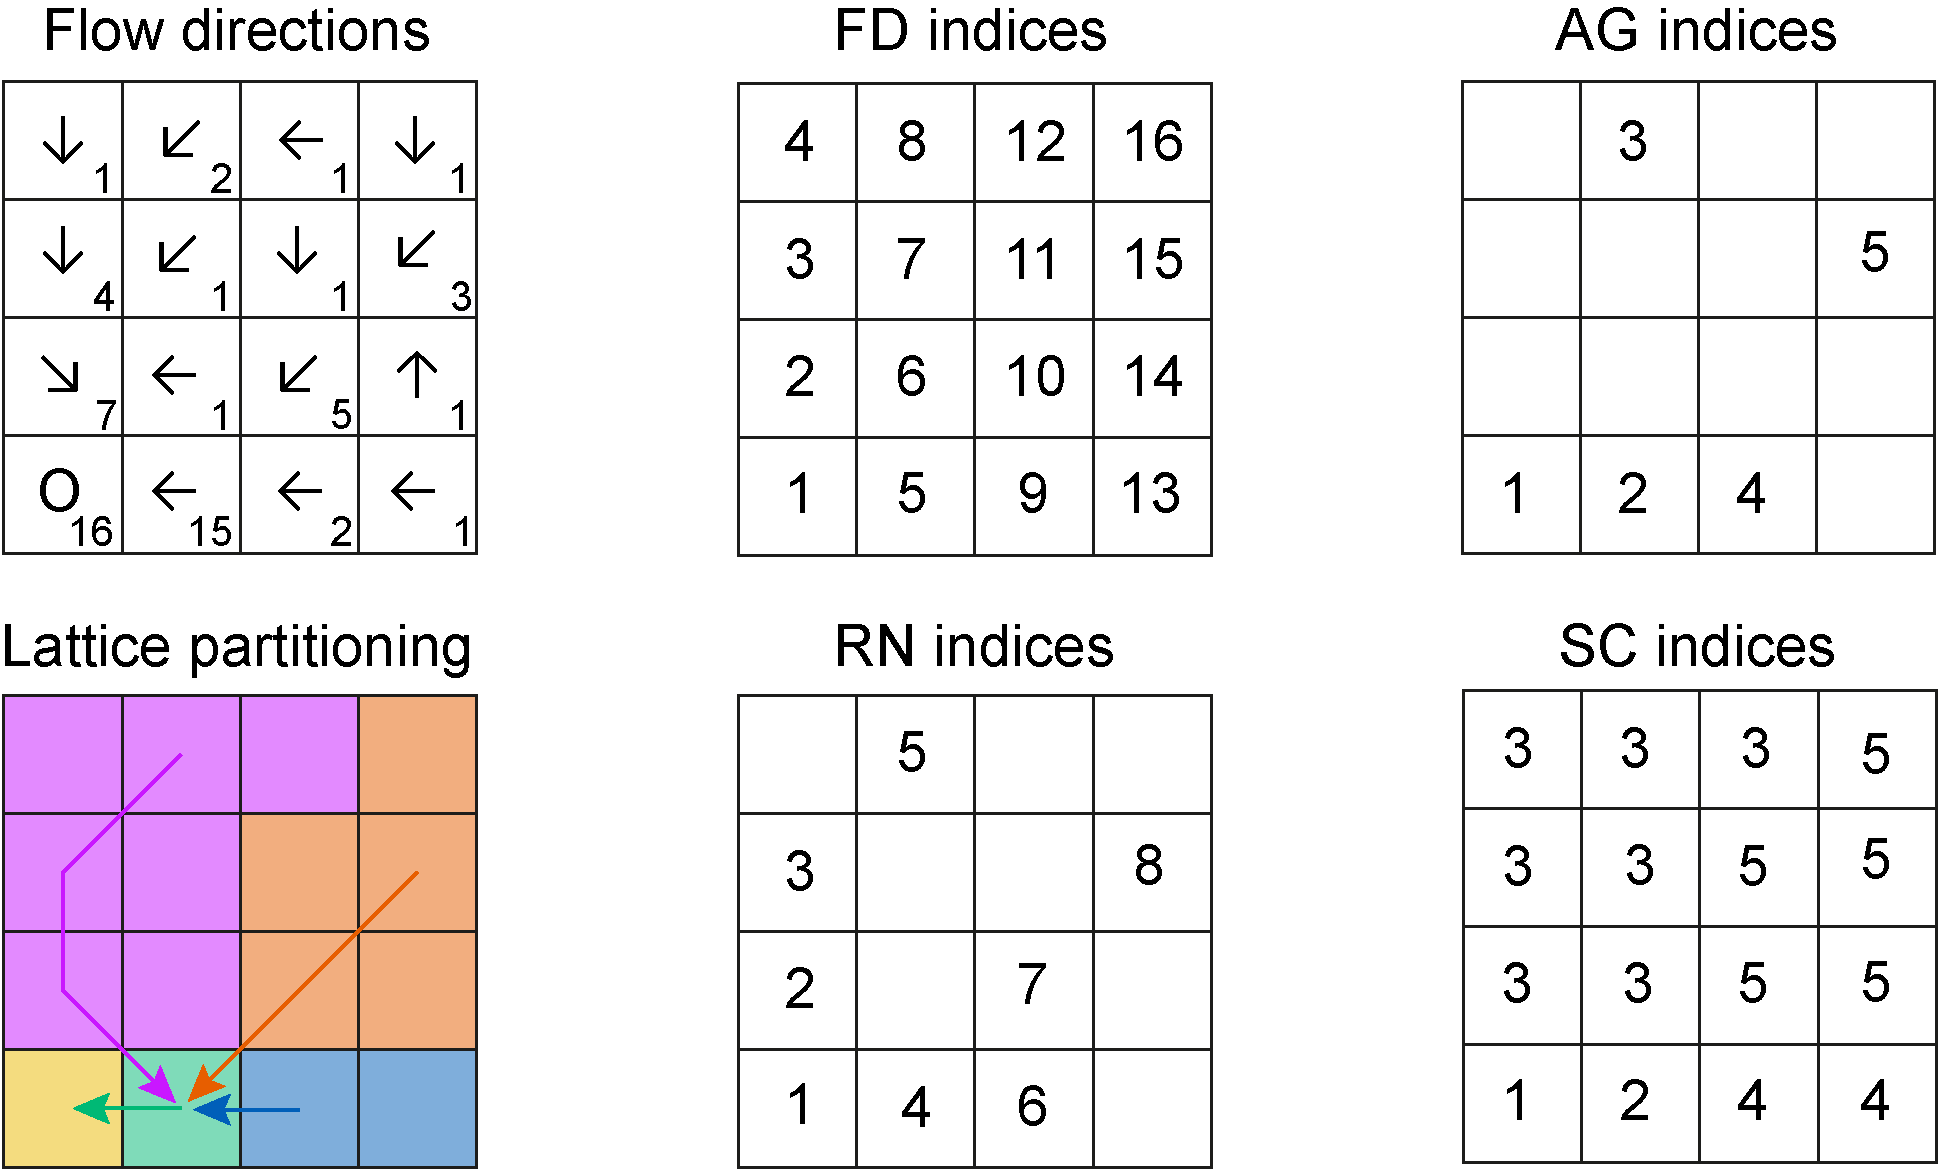 Top-left panel: arrows display flow directions, numbers identify contributing areas. Bottom-left panel: the network is aggregated by imposing a threshold equal to 2 pixels. The other panels display indices of nodes at the different aggregation levels. 